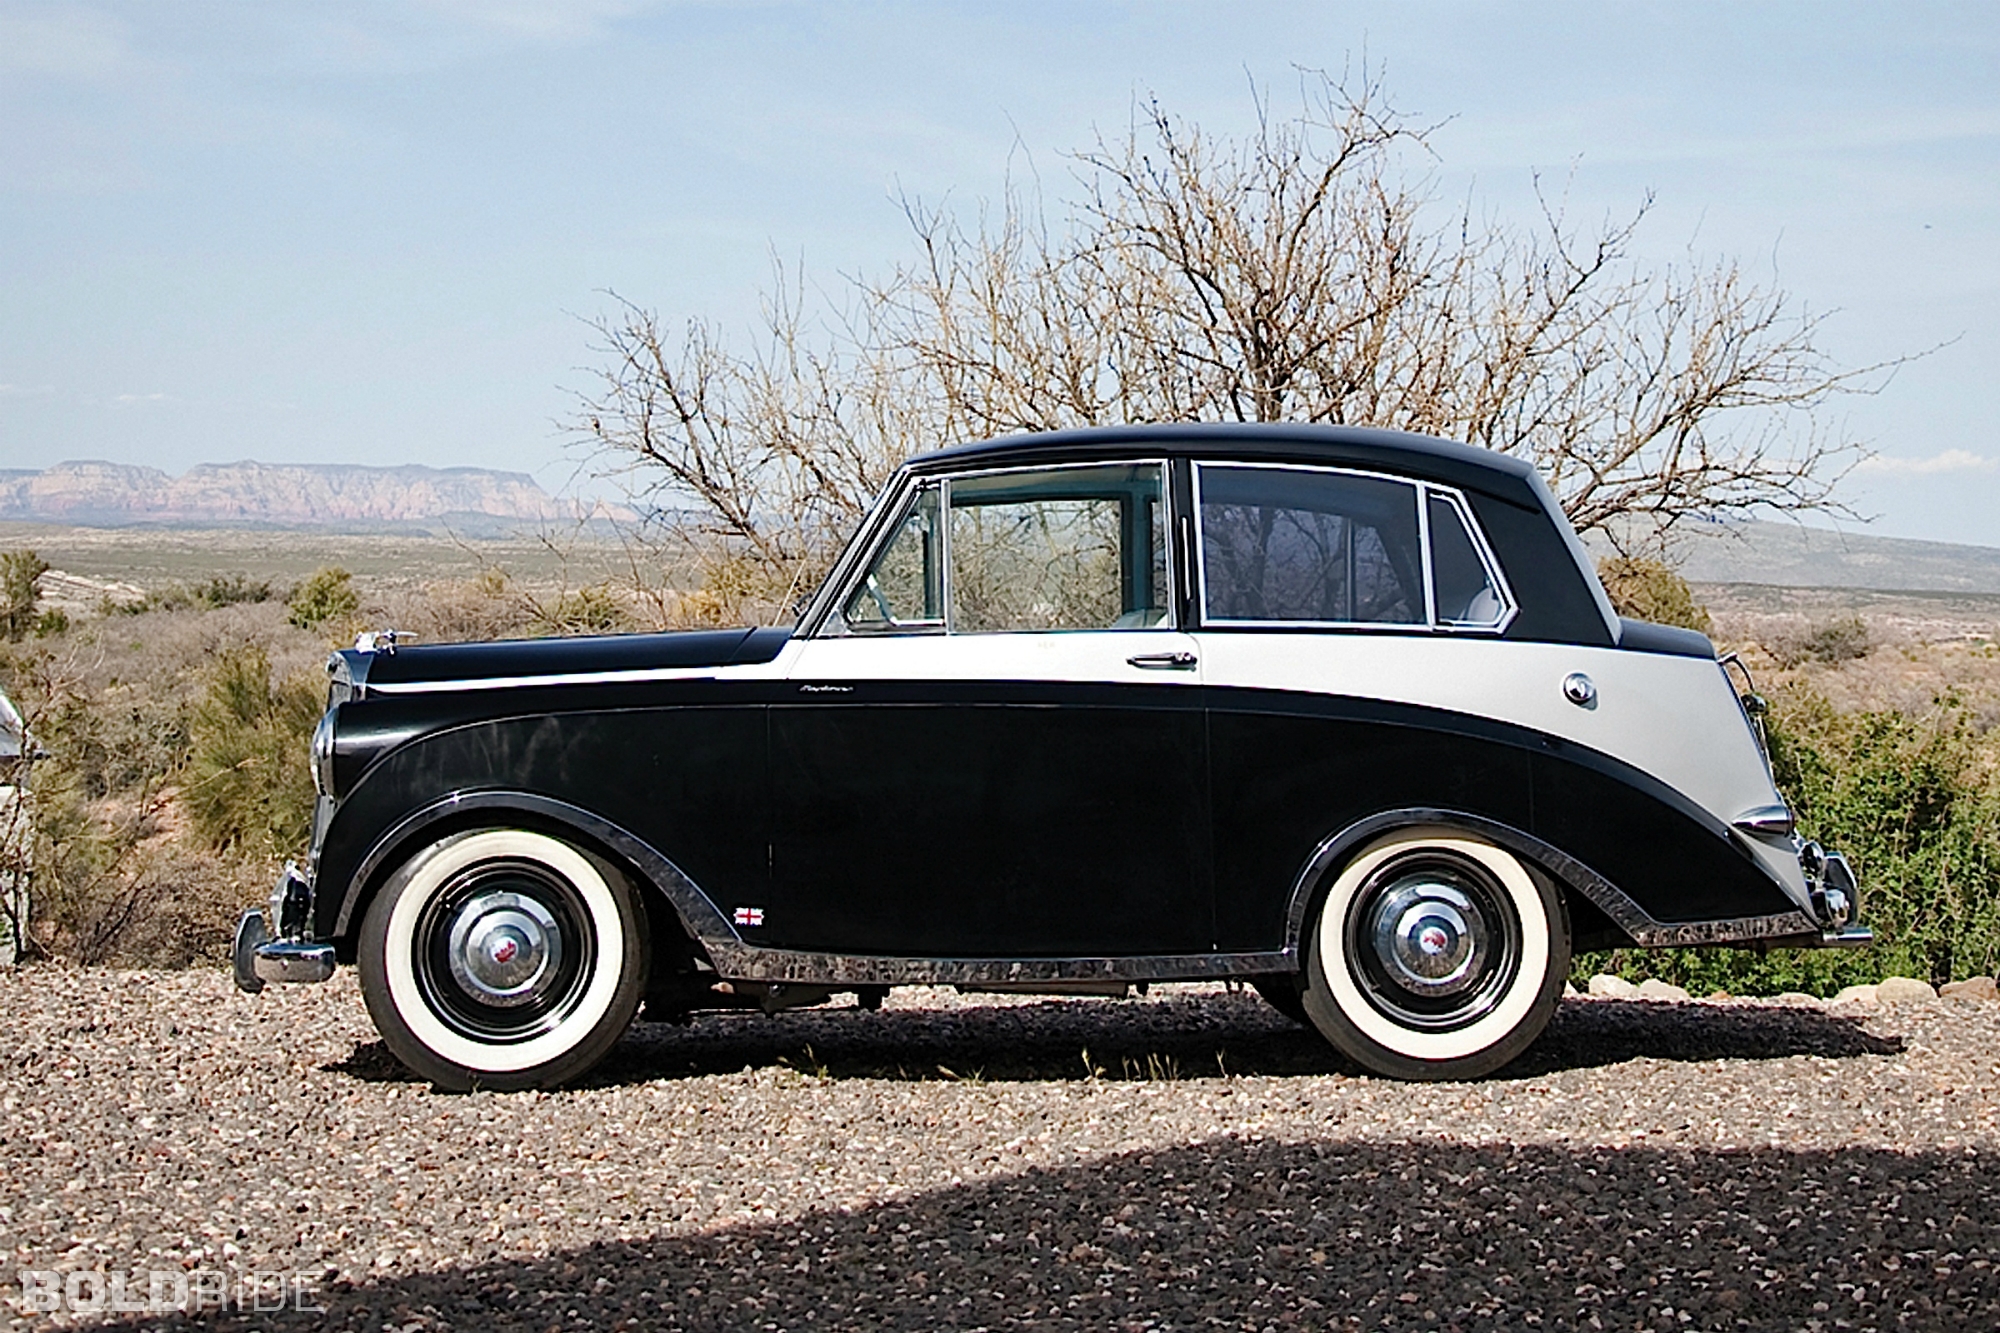 Triumph 1200E Saloon Photo Gallery: Photo #08 out of 11, Image ...